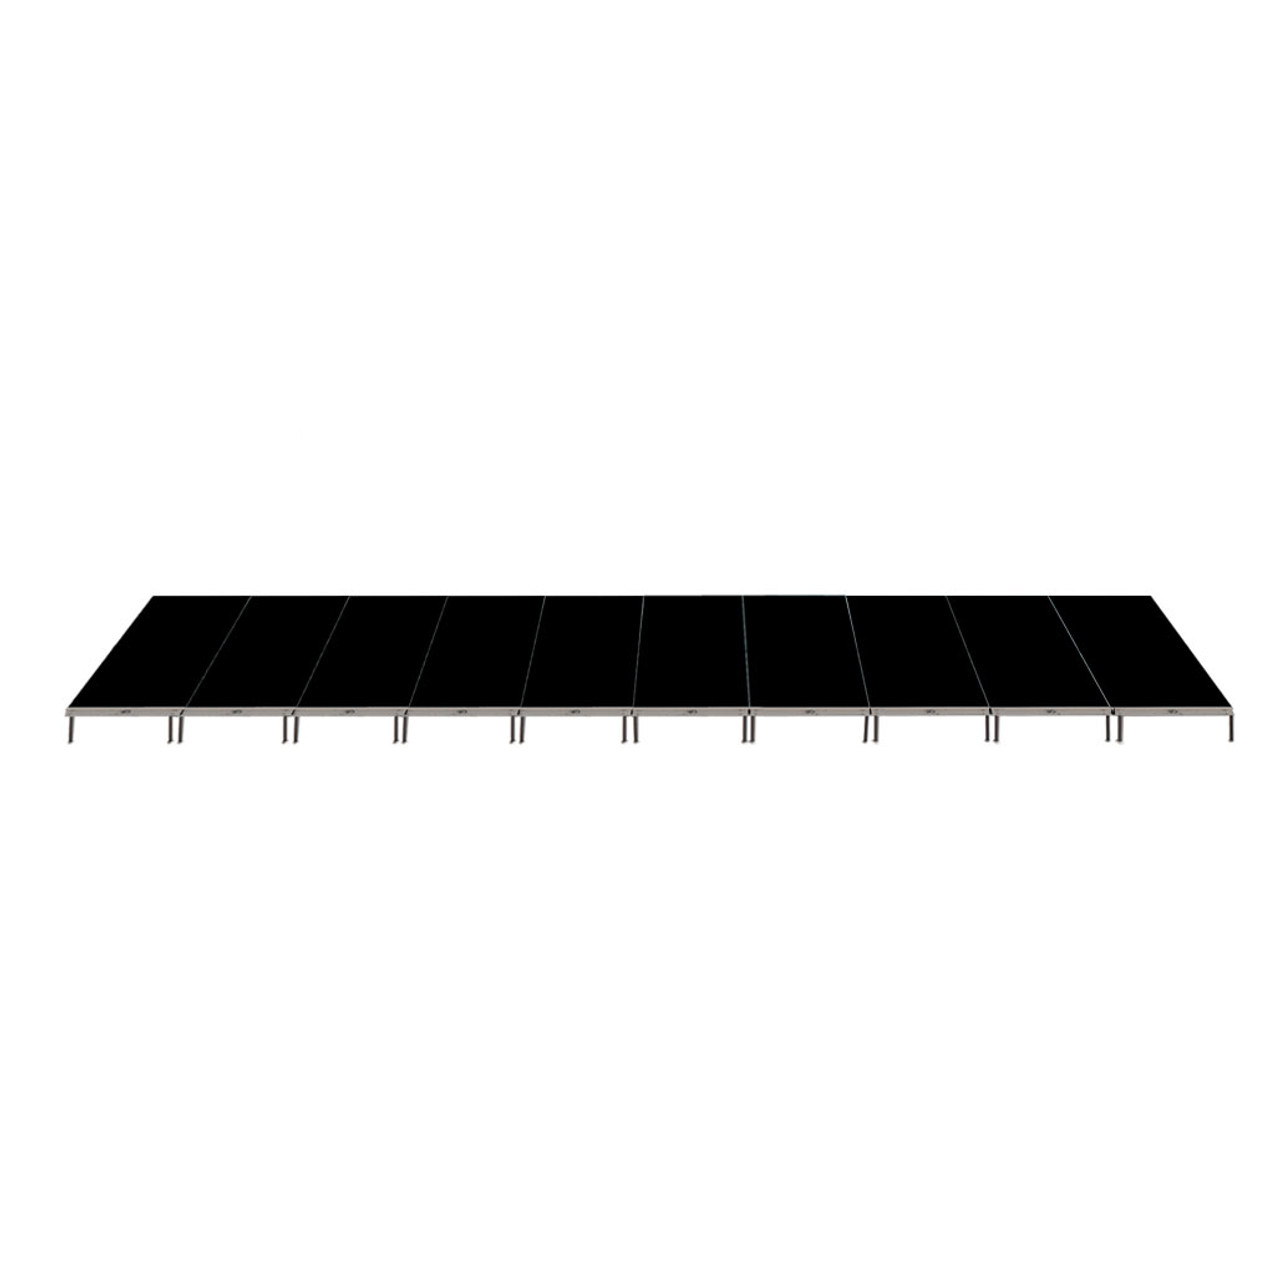 Top rated Quik Stage 8' x 40' x 8" High Portable Stage Package with Black Polyvinyl Non-Skid Surface. Additional Surfaces and Heights Available.